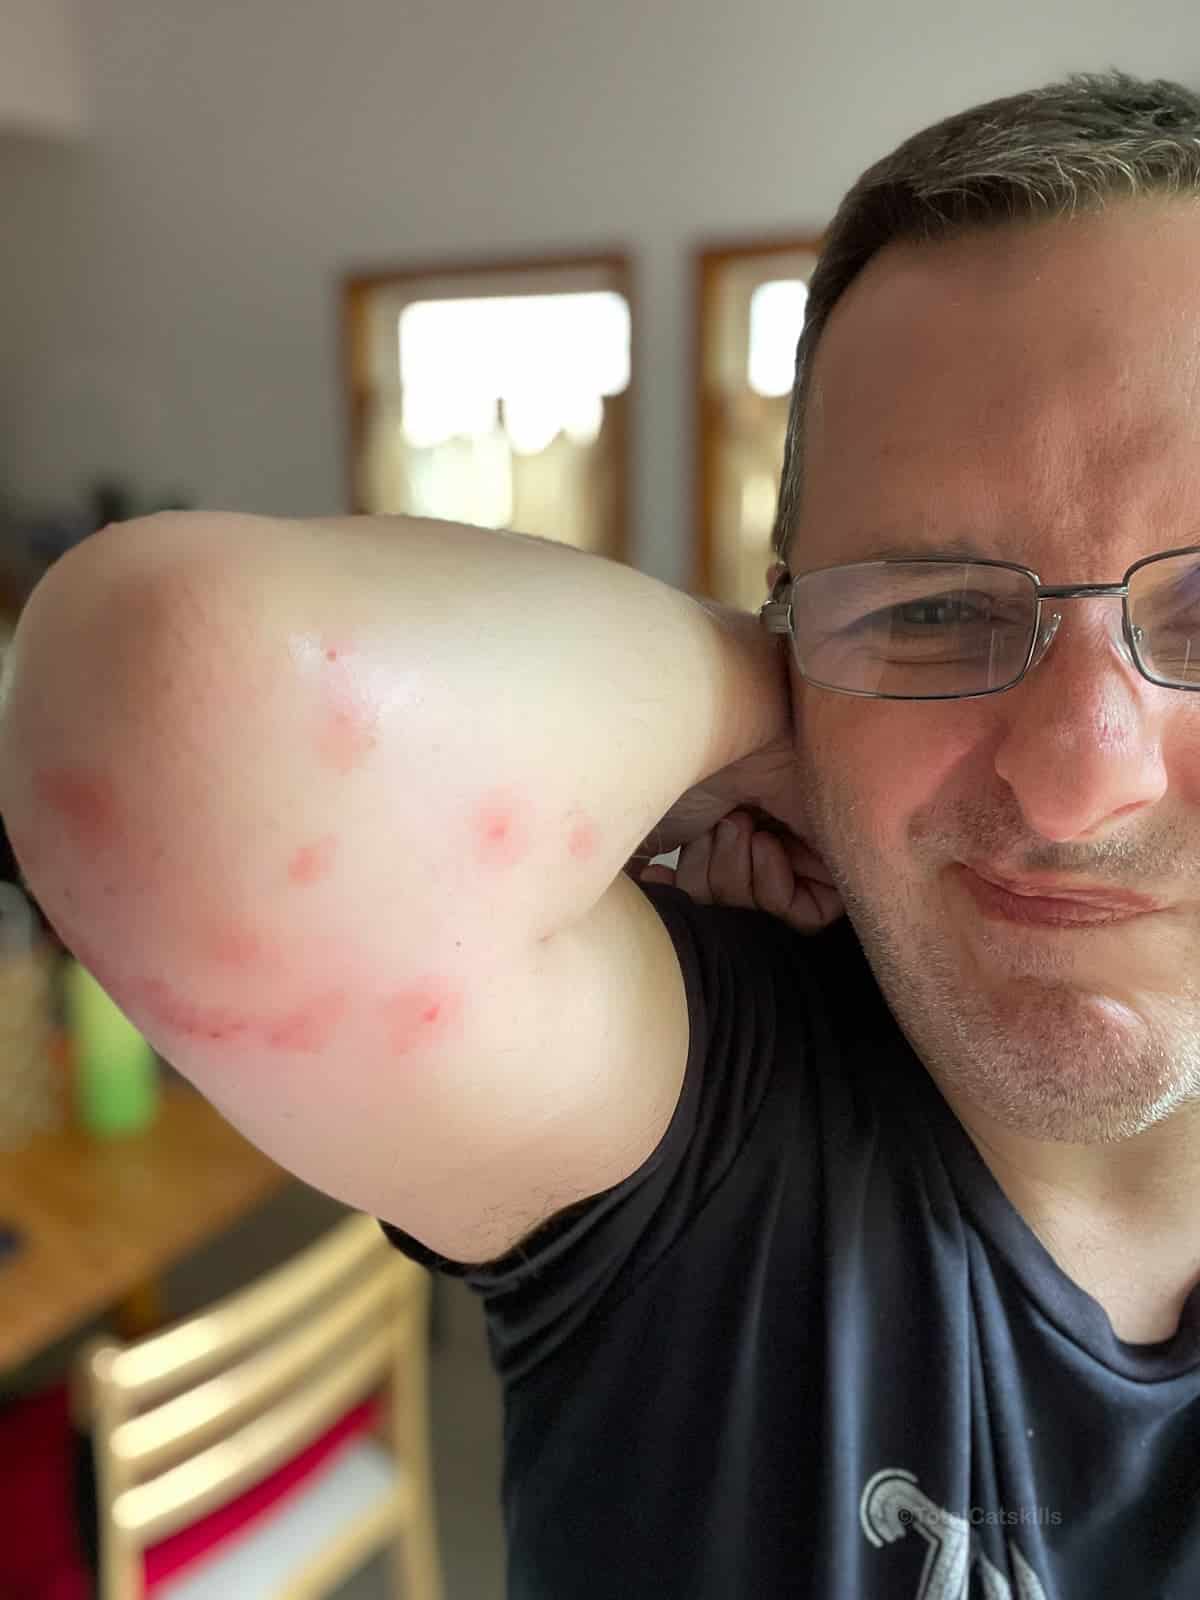 Sean’s arm covered in black fly bites